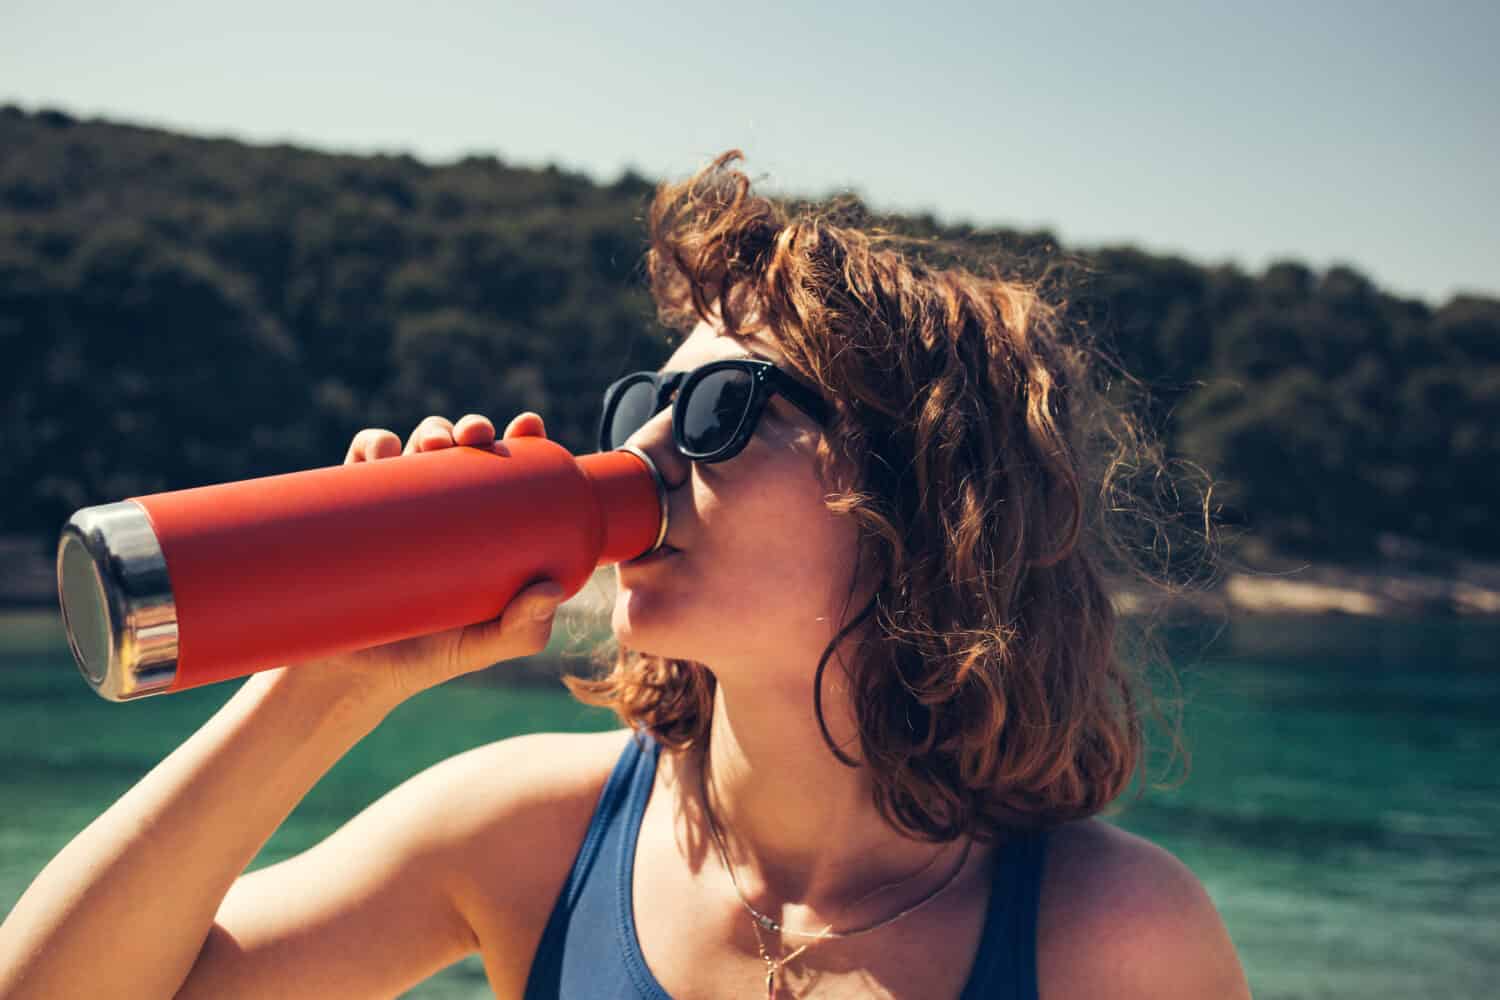 A beautiful girl drinking from a steel water bottle at the beach